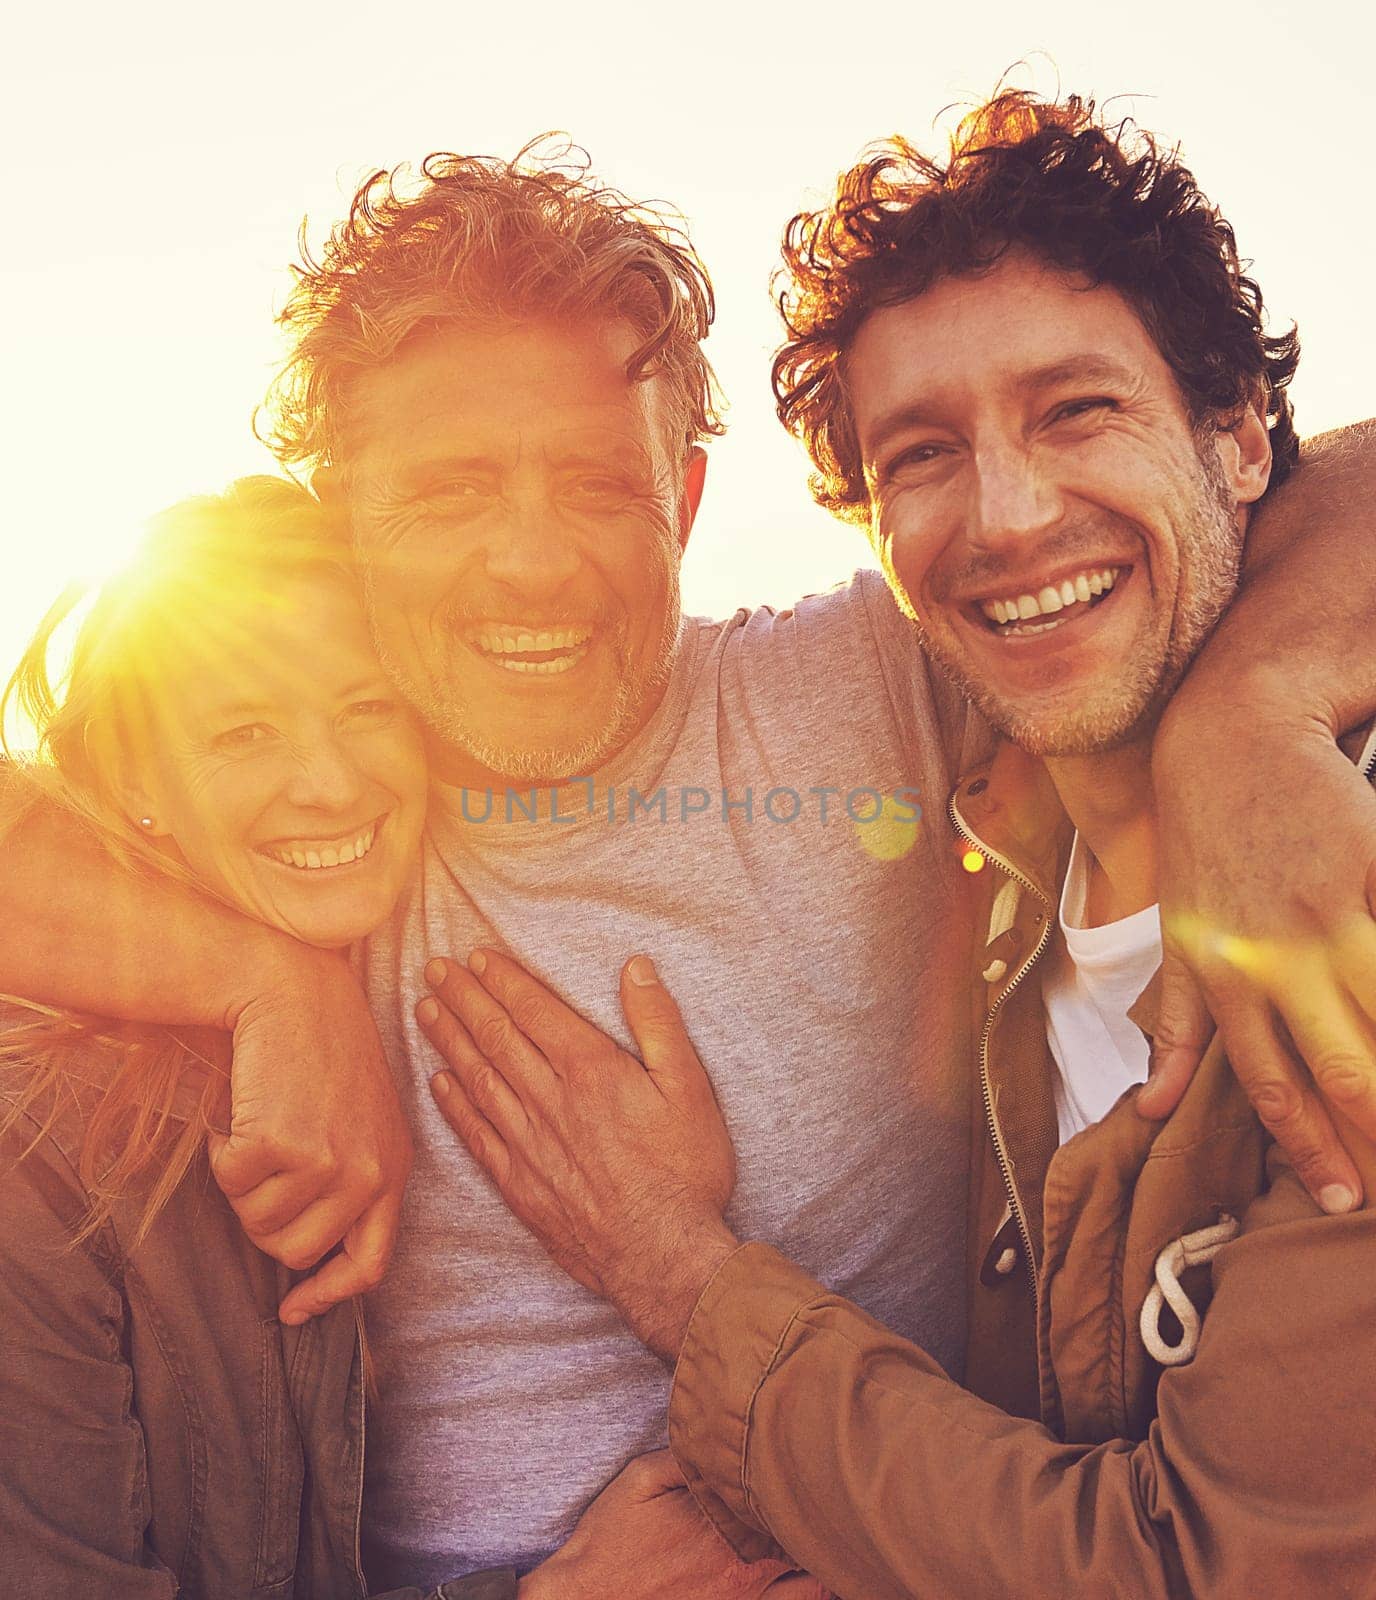 Sunset, hug and senior parent with children for adventure, hiking and walking outdoors. Family, travel and mature father with man and woman embrace on holiday, vacation and weekend together in nature.